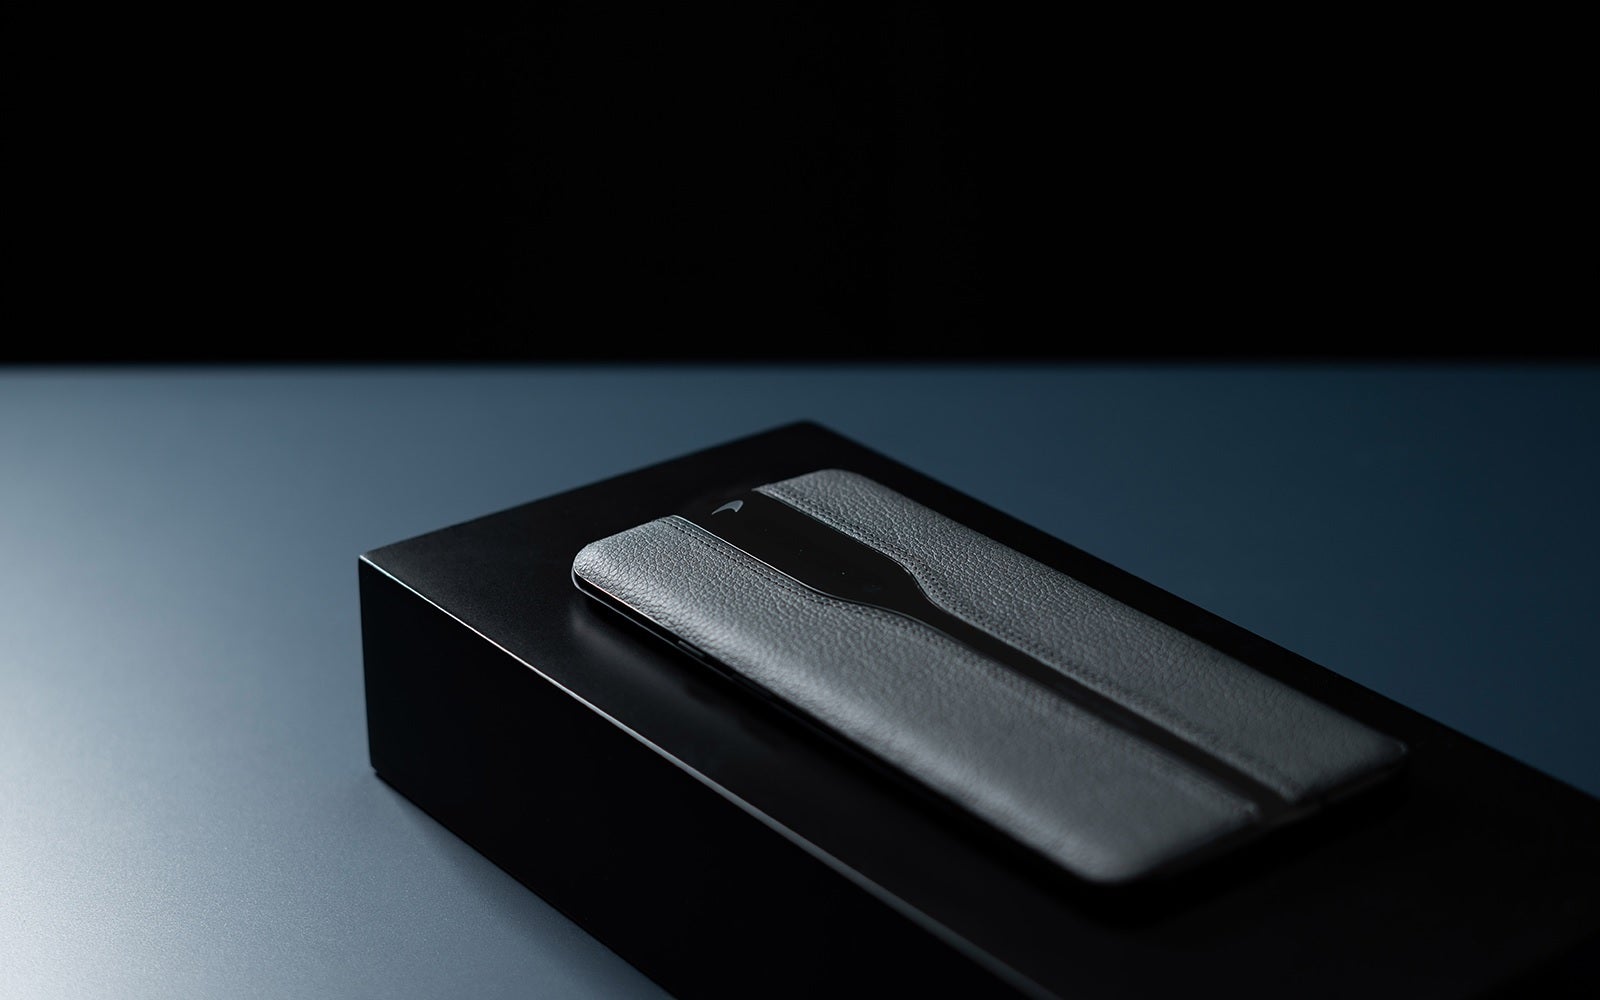 Black leather prototype of the OnePlus Concept One - OnePlus' invisible camera phone concept looks marvelous in black leather